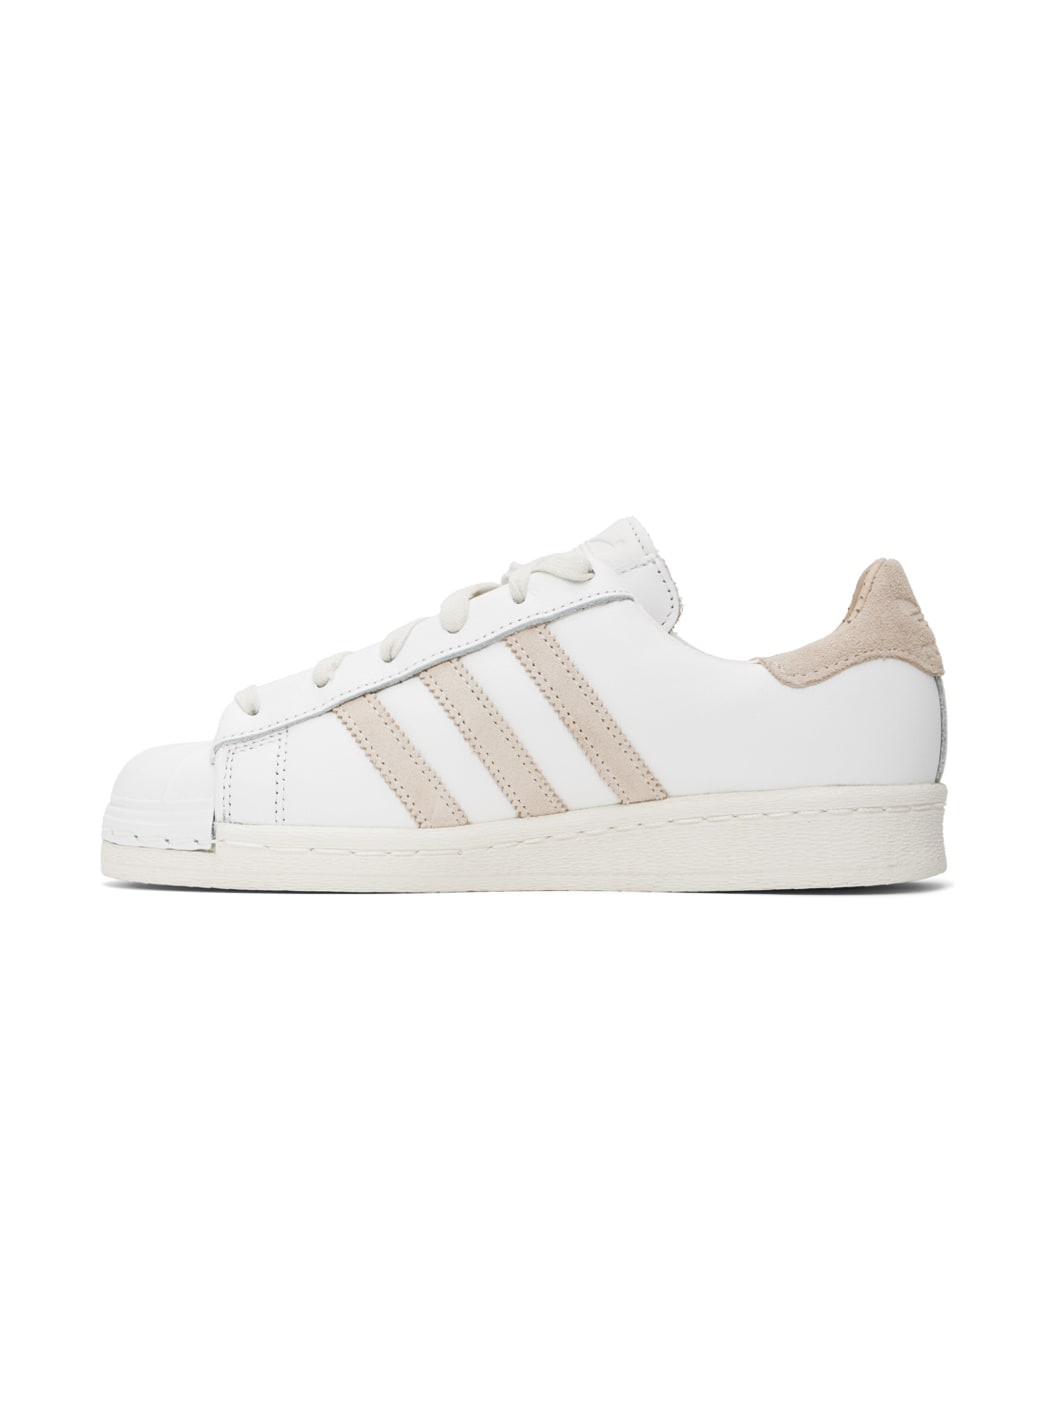 Off-White Superstar Lux Sneakers - 3